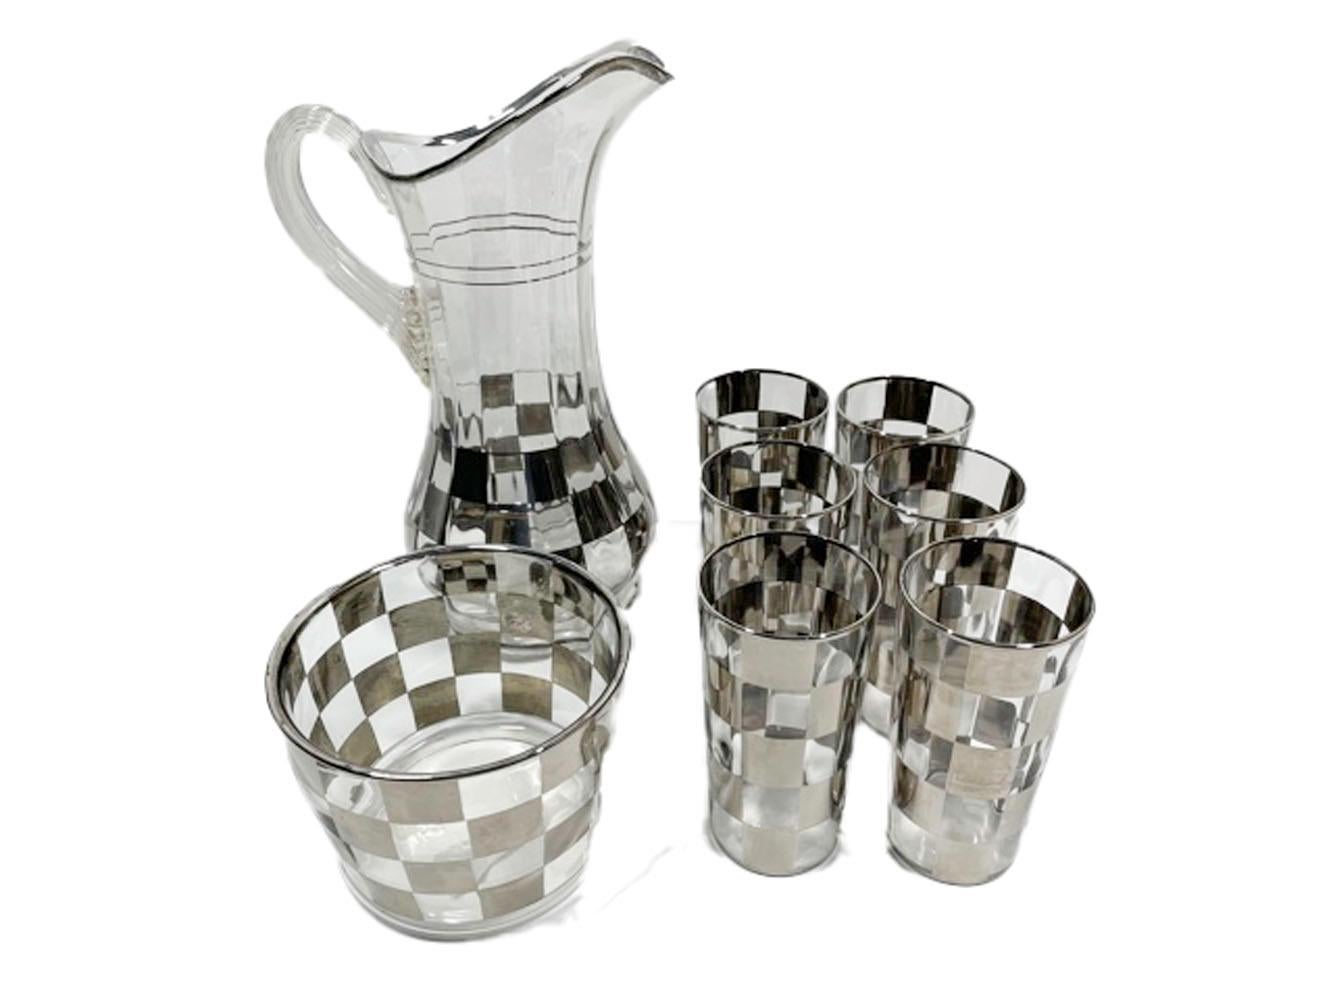 Vintage cocktail set consisting of a cocktail pitcher, ice bowl and six highball glasses. The clear vertically ribbed glass having an optical effect and is decorated with a silver check pattern. The large ewer form pitcher has an applied ribbed